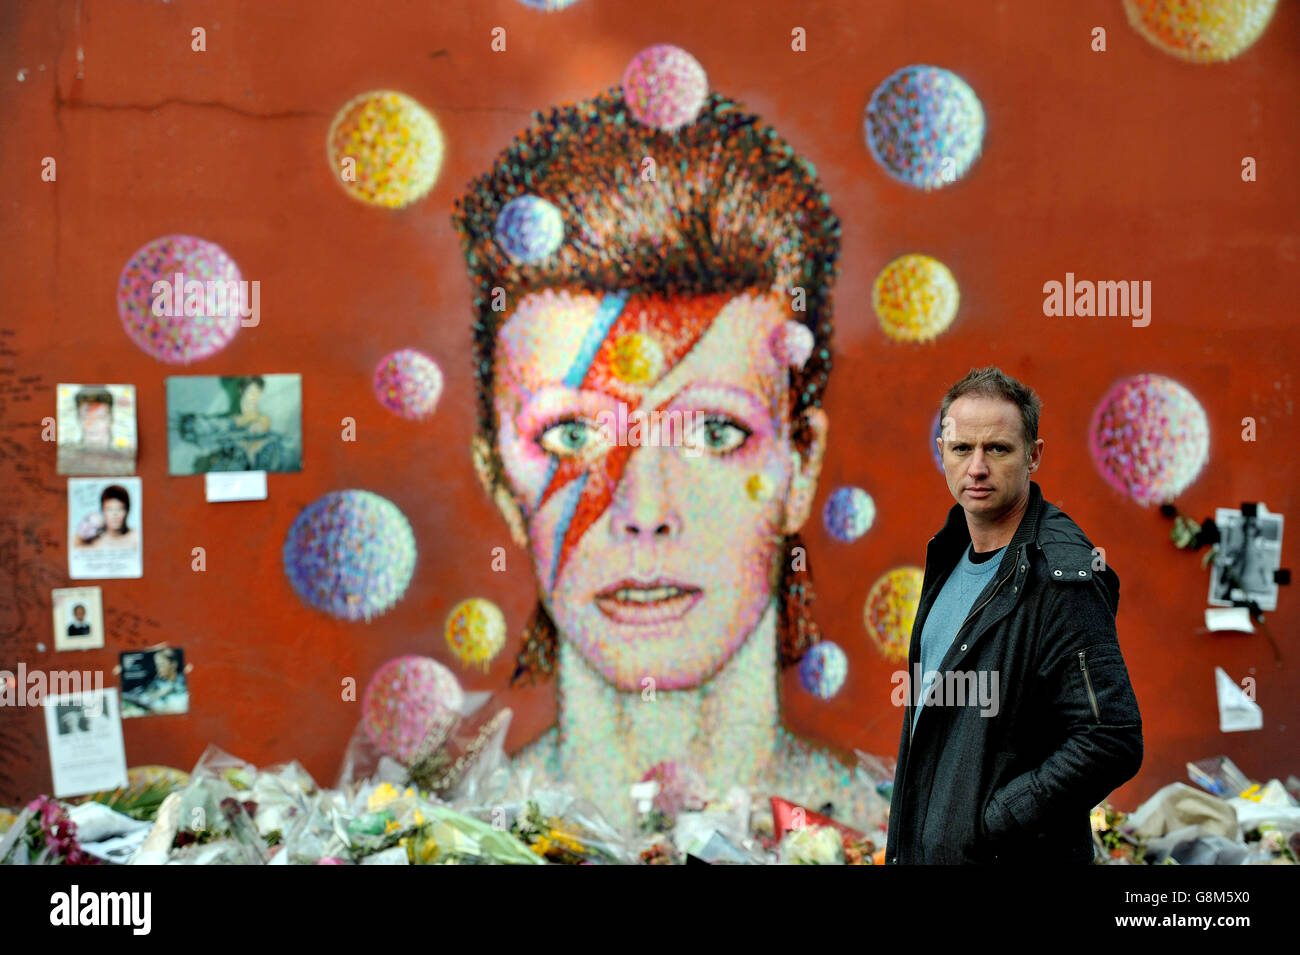 Artist Jimmy C, stands in front of his David Bowie mural artwork on the wall of a Morley's store in Brixton, London, as he views flowers and tributes for the first time after returning from aboard, which have been left for the singer who died of cancer earlier this year. Stock Photo